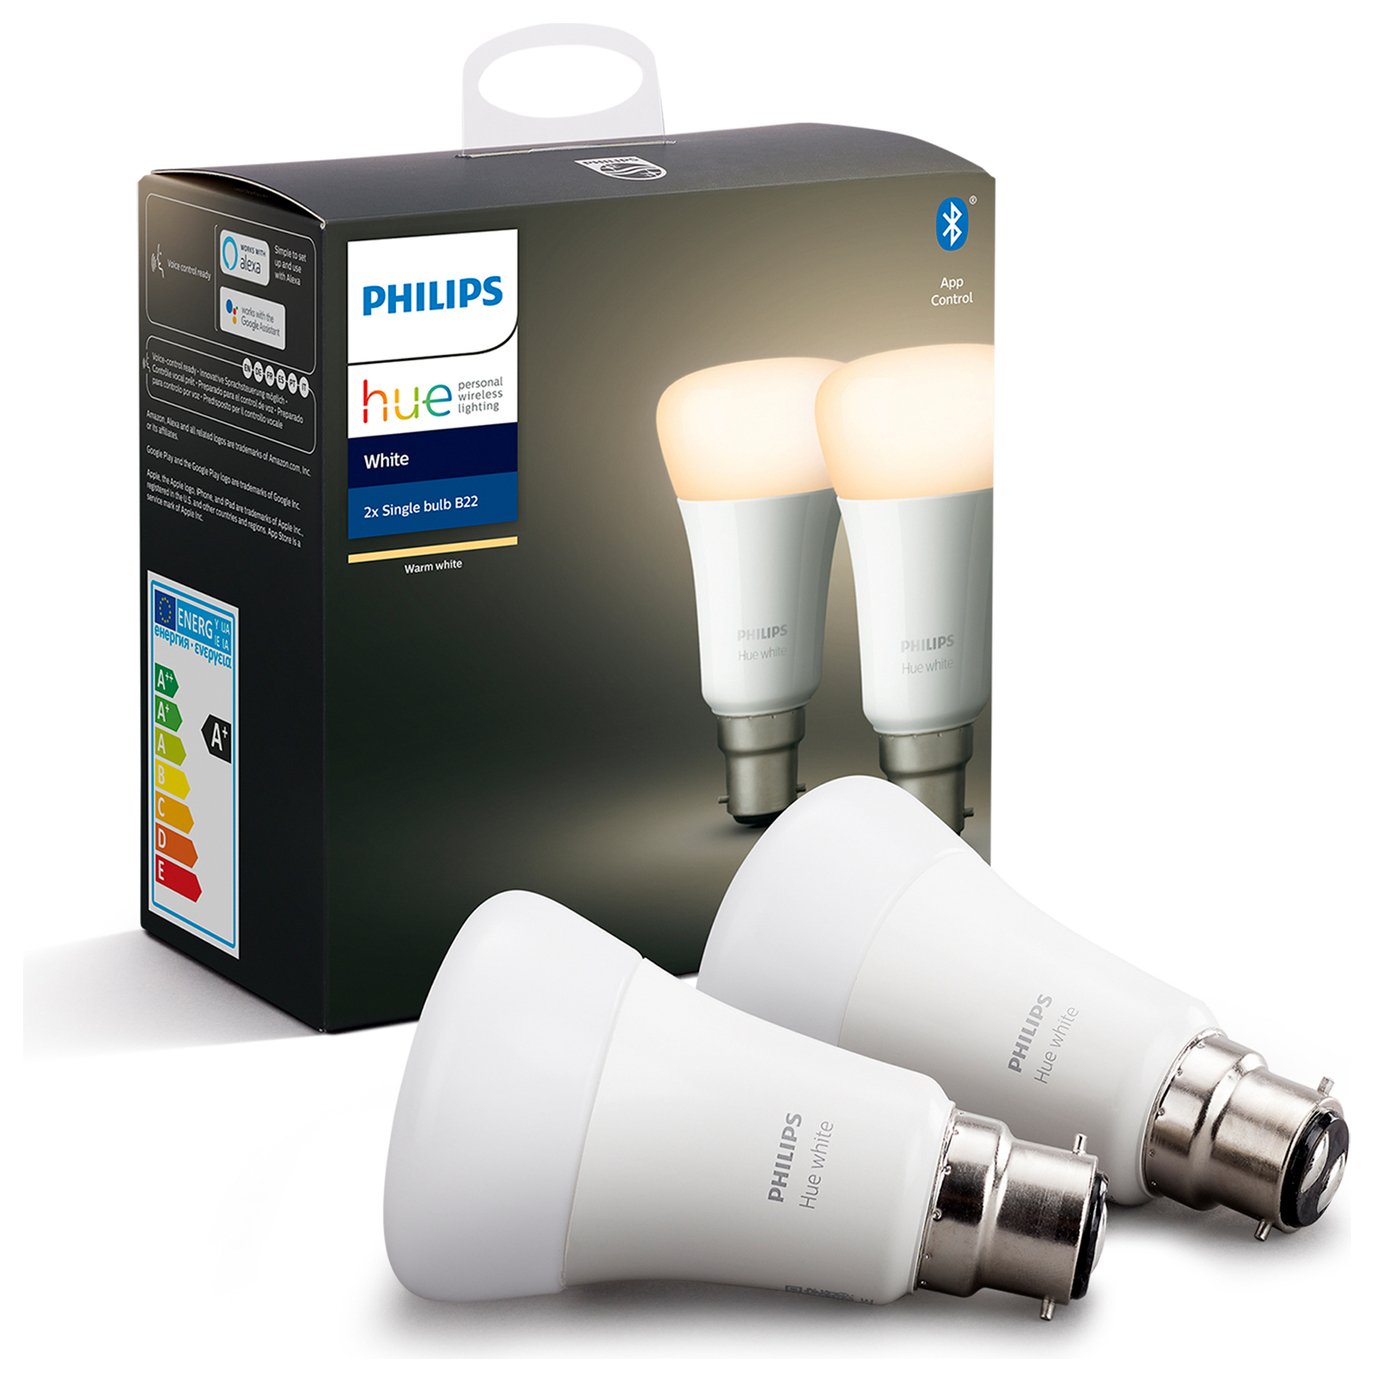 Philips Hue B22 White Smart Bulbs With Bluetooth - 2 Pack